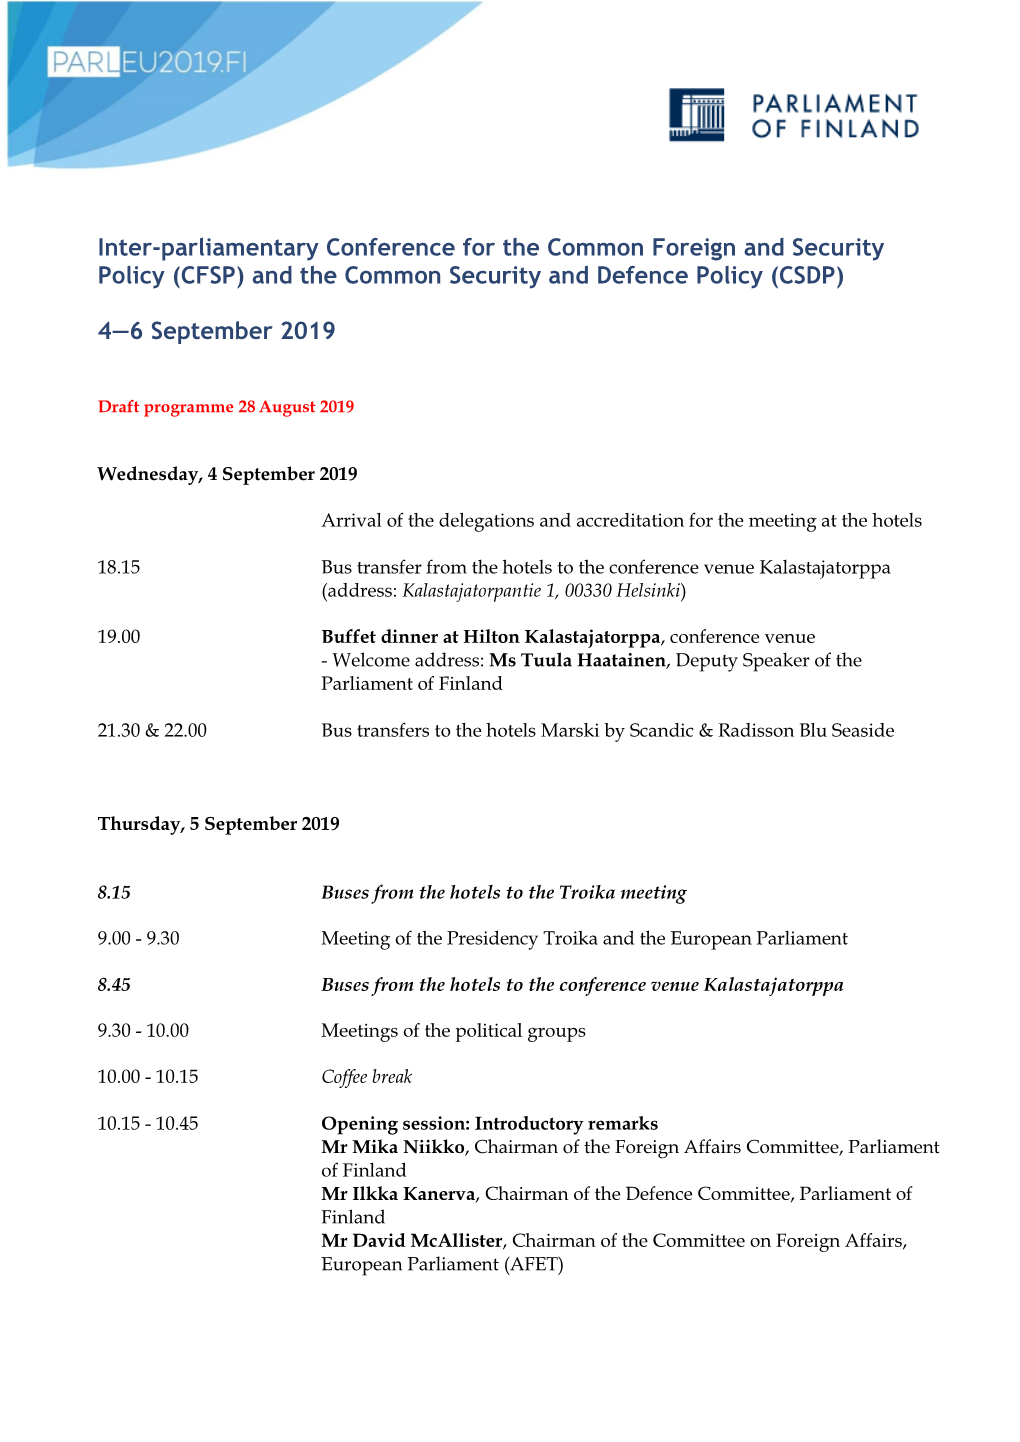 Inter-Parliamentary Conference for the Common Foreign and Security Policy (CFSP) and the Common Security and Defence Policy (CSDP)